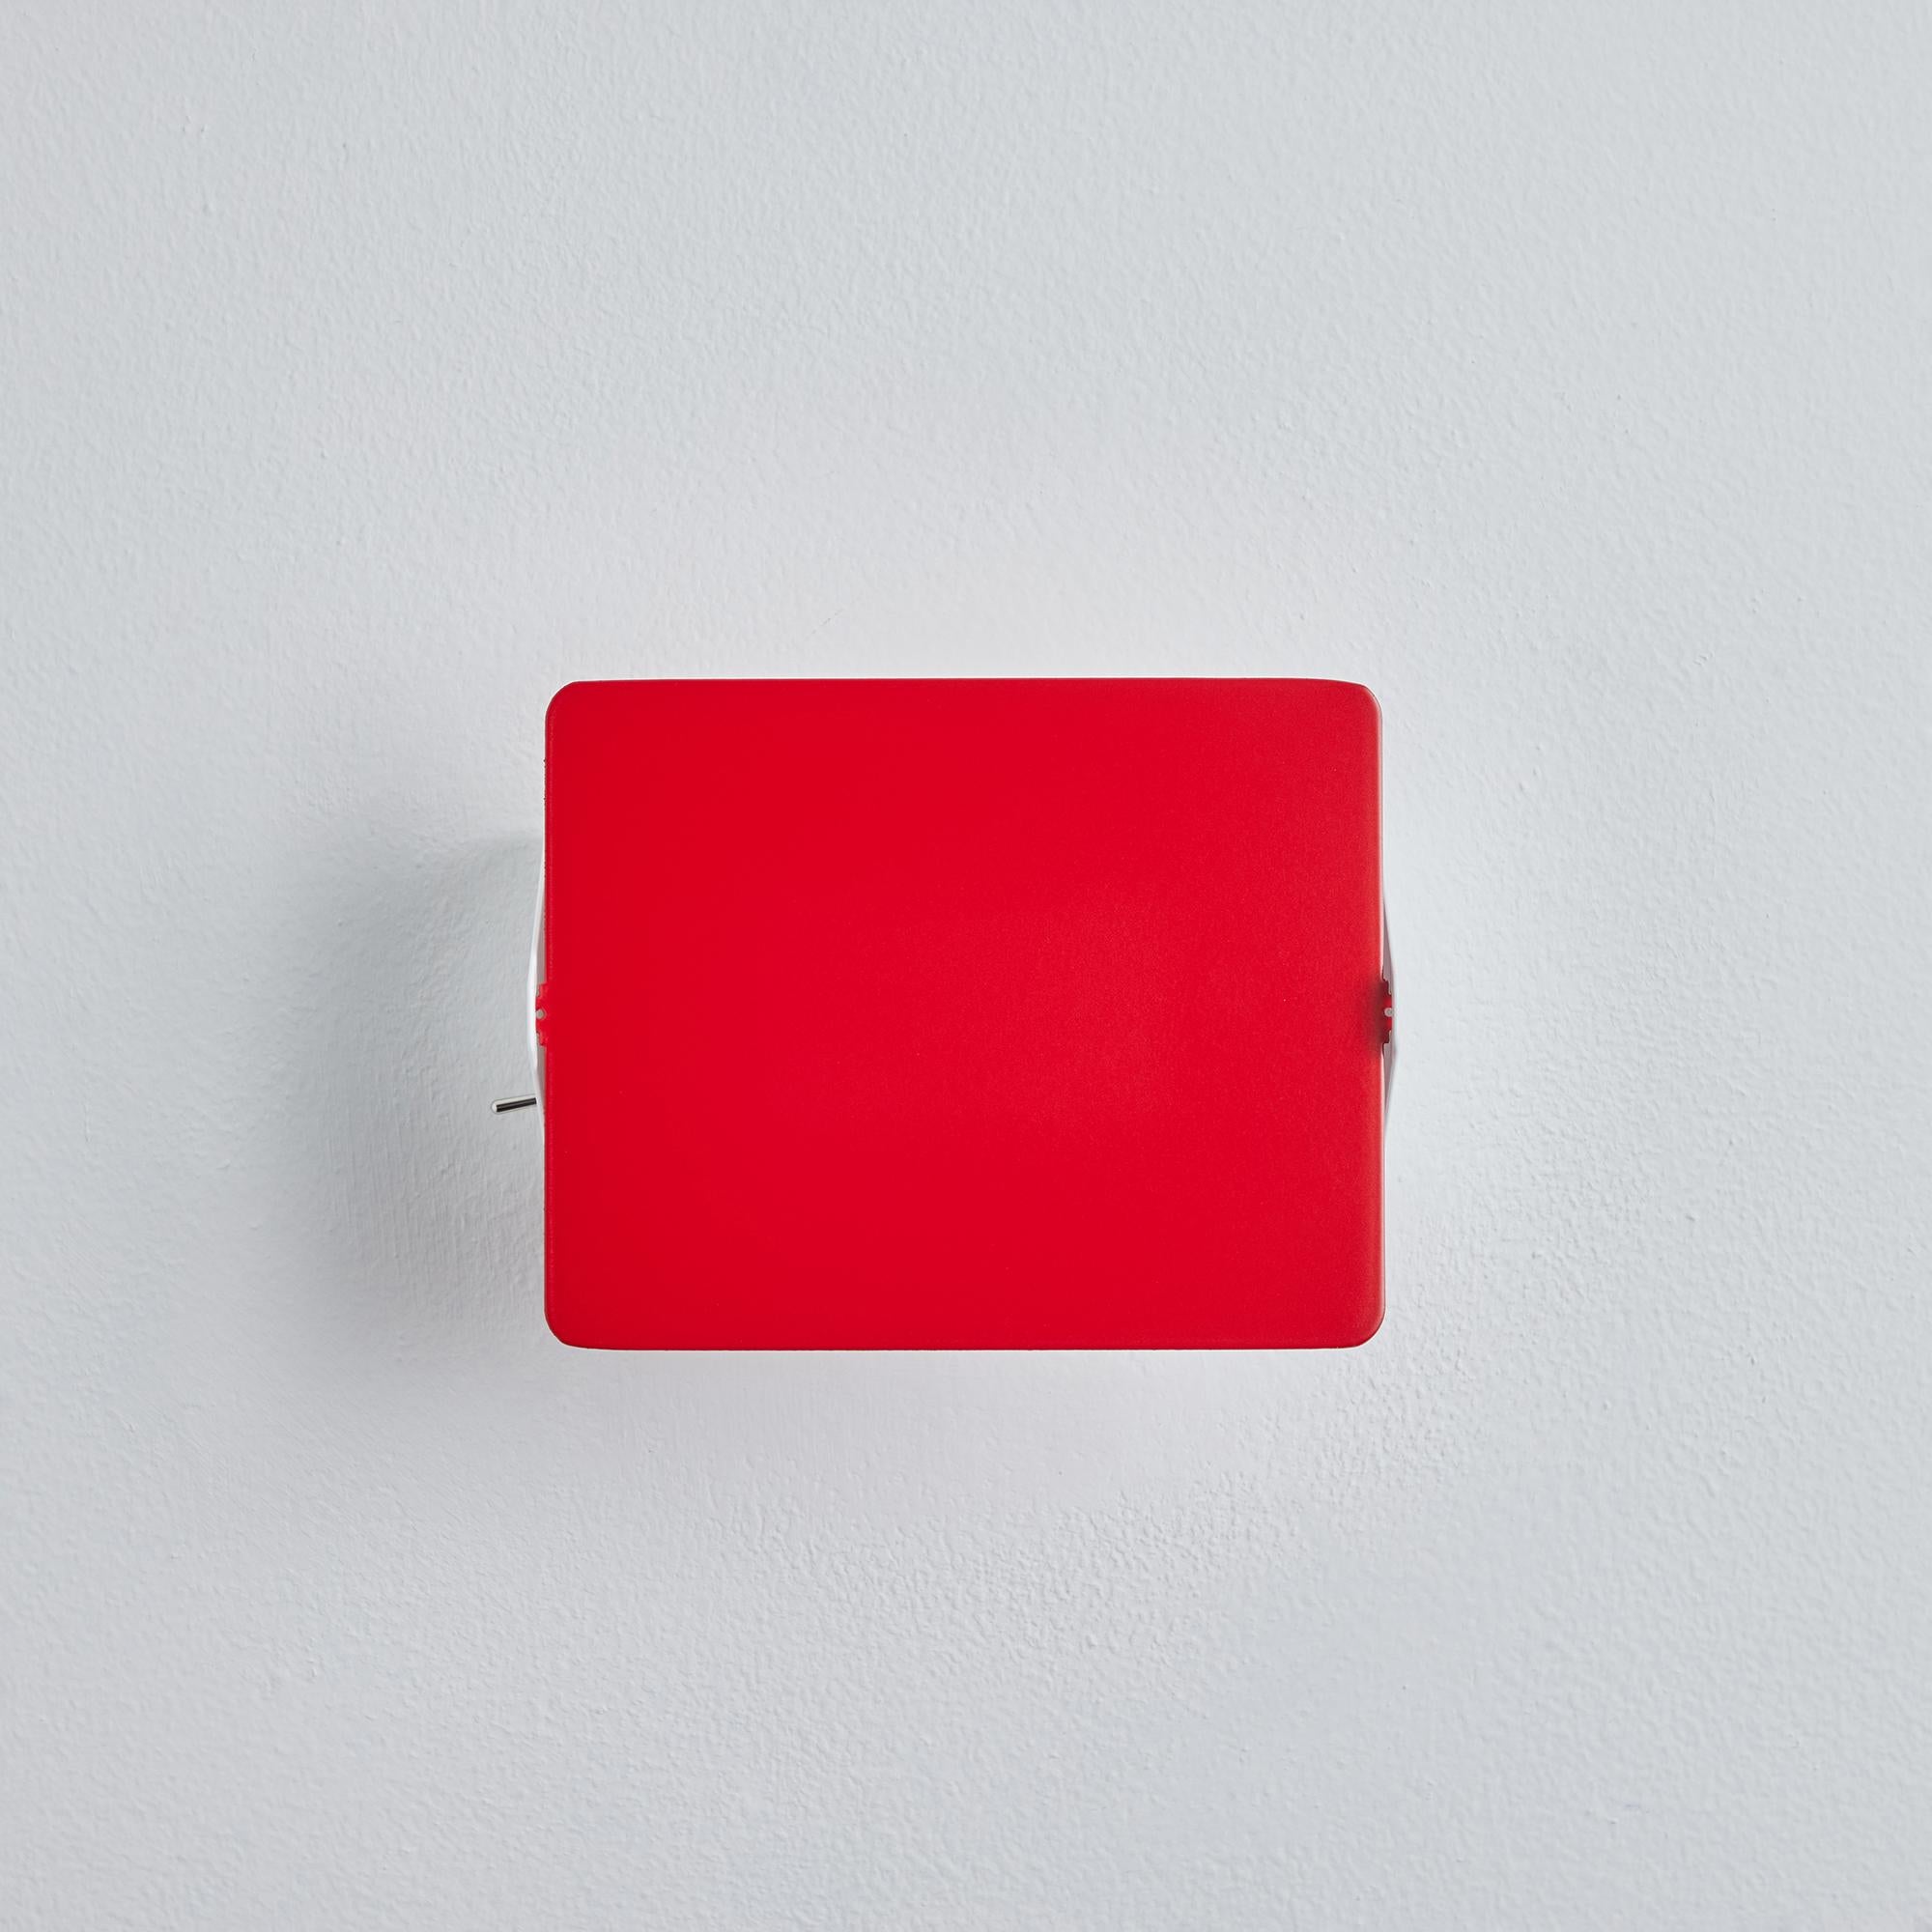 Charlotte Perriand 'Applique à Volet Pivotant' wall light in red for Nemo. 

Originally designed in the 1950s as the iconic CP1, these newly produced authorized re-editions are still made in France with the highest level of integrity and attention